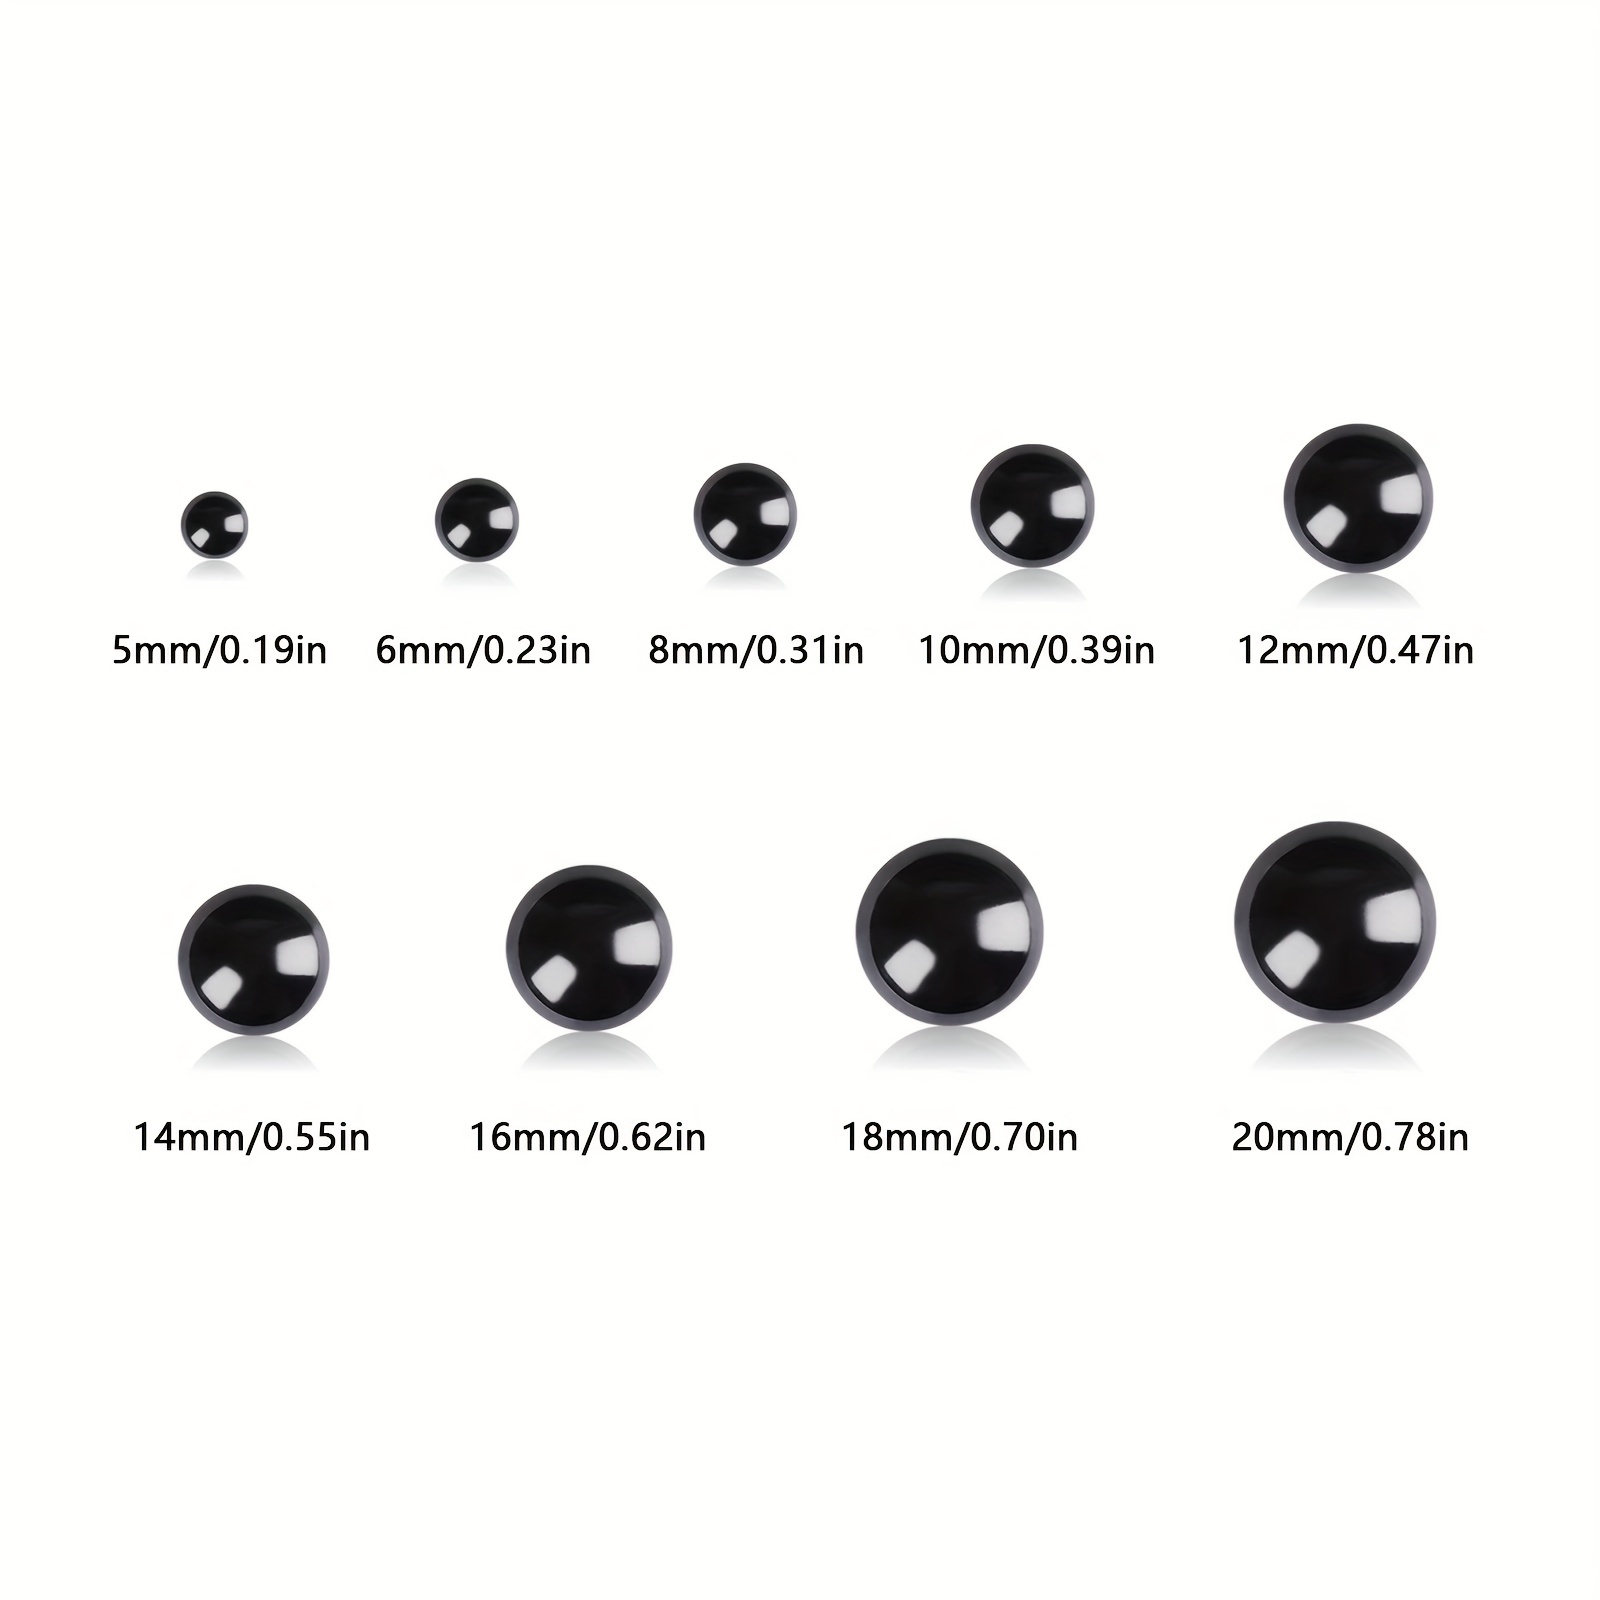 566Pcs Colorful Safety Eyes and Noses Set 6mm-14mm Plastic Safety